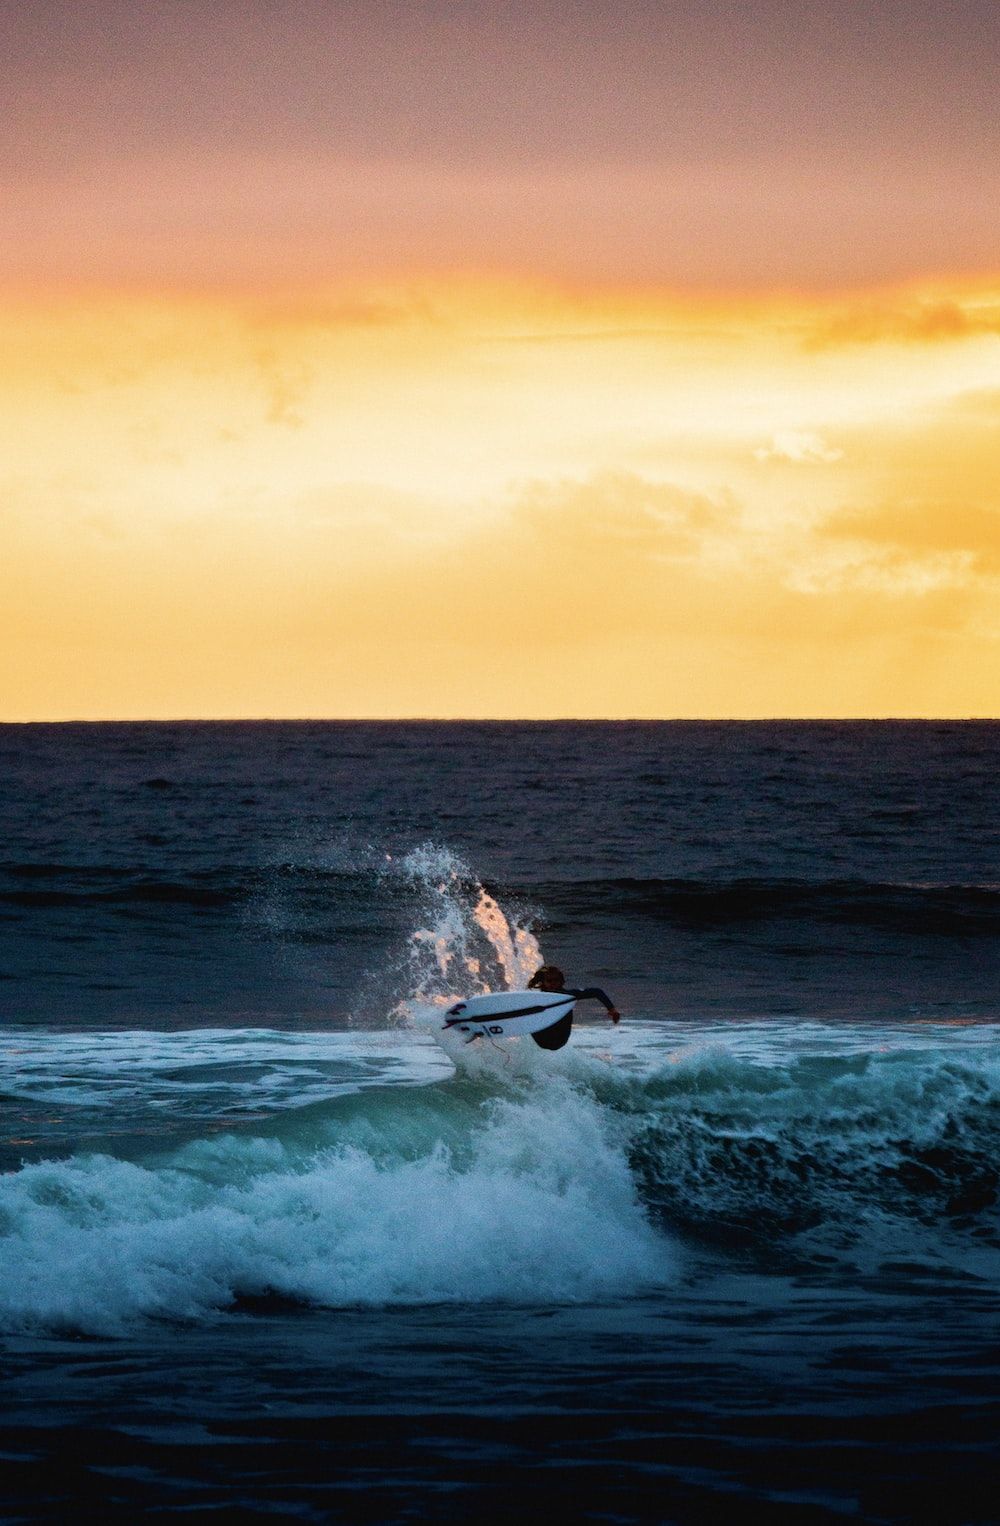 man surfing on sea waves during sunset photo